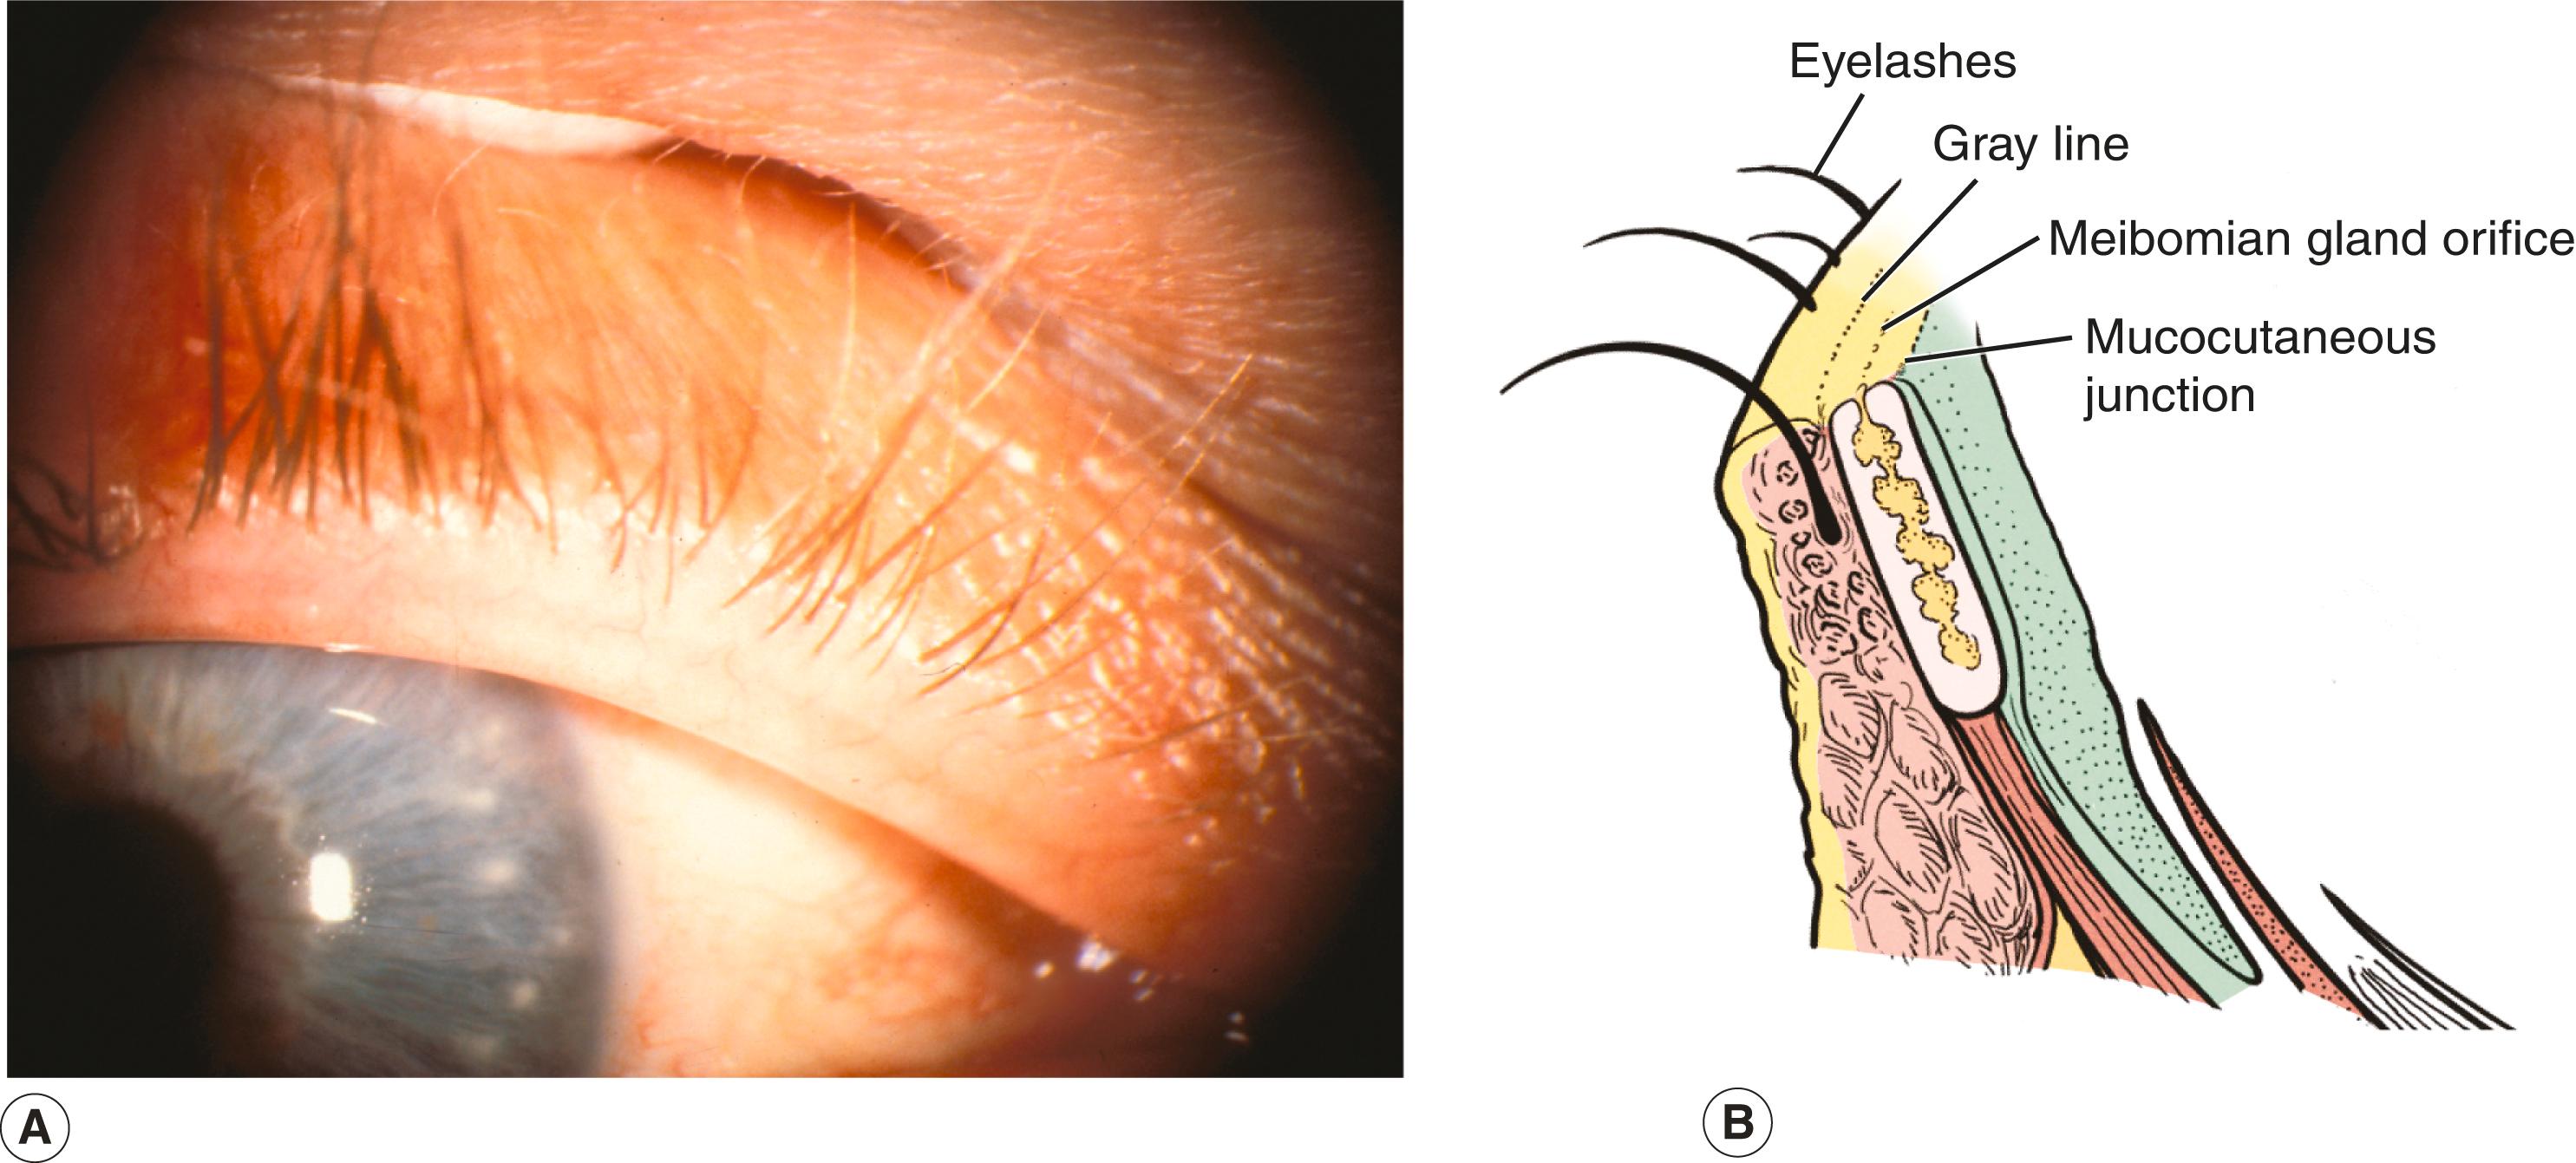 Figure 5.1, Normal eyelid margin. ( A ) The lid margin is a flat platform with a sharp right-angled posterior edge. ( B ) Normal landmarks (from posterior to anterior) are the mucocutaneous junction, meibomian gland orifices, gray line, and eyelashes.